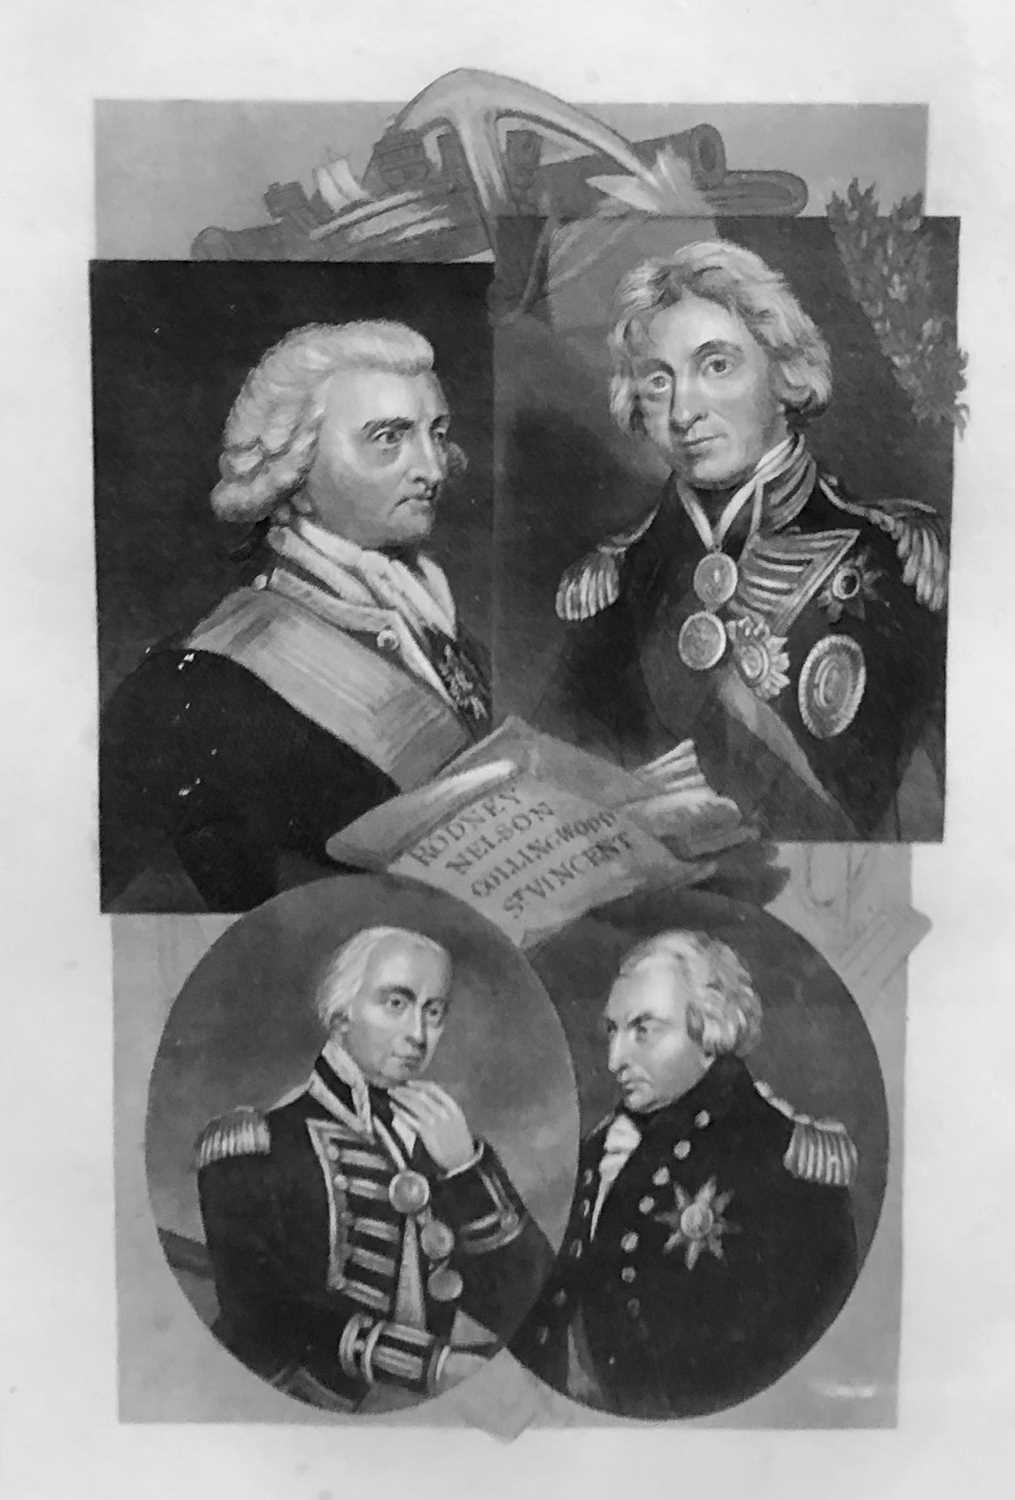 A collection of portraits and other memorabilia connected to the life and times of Horatio Nelson,